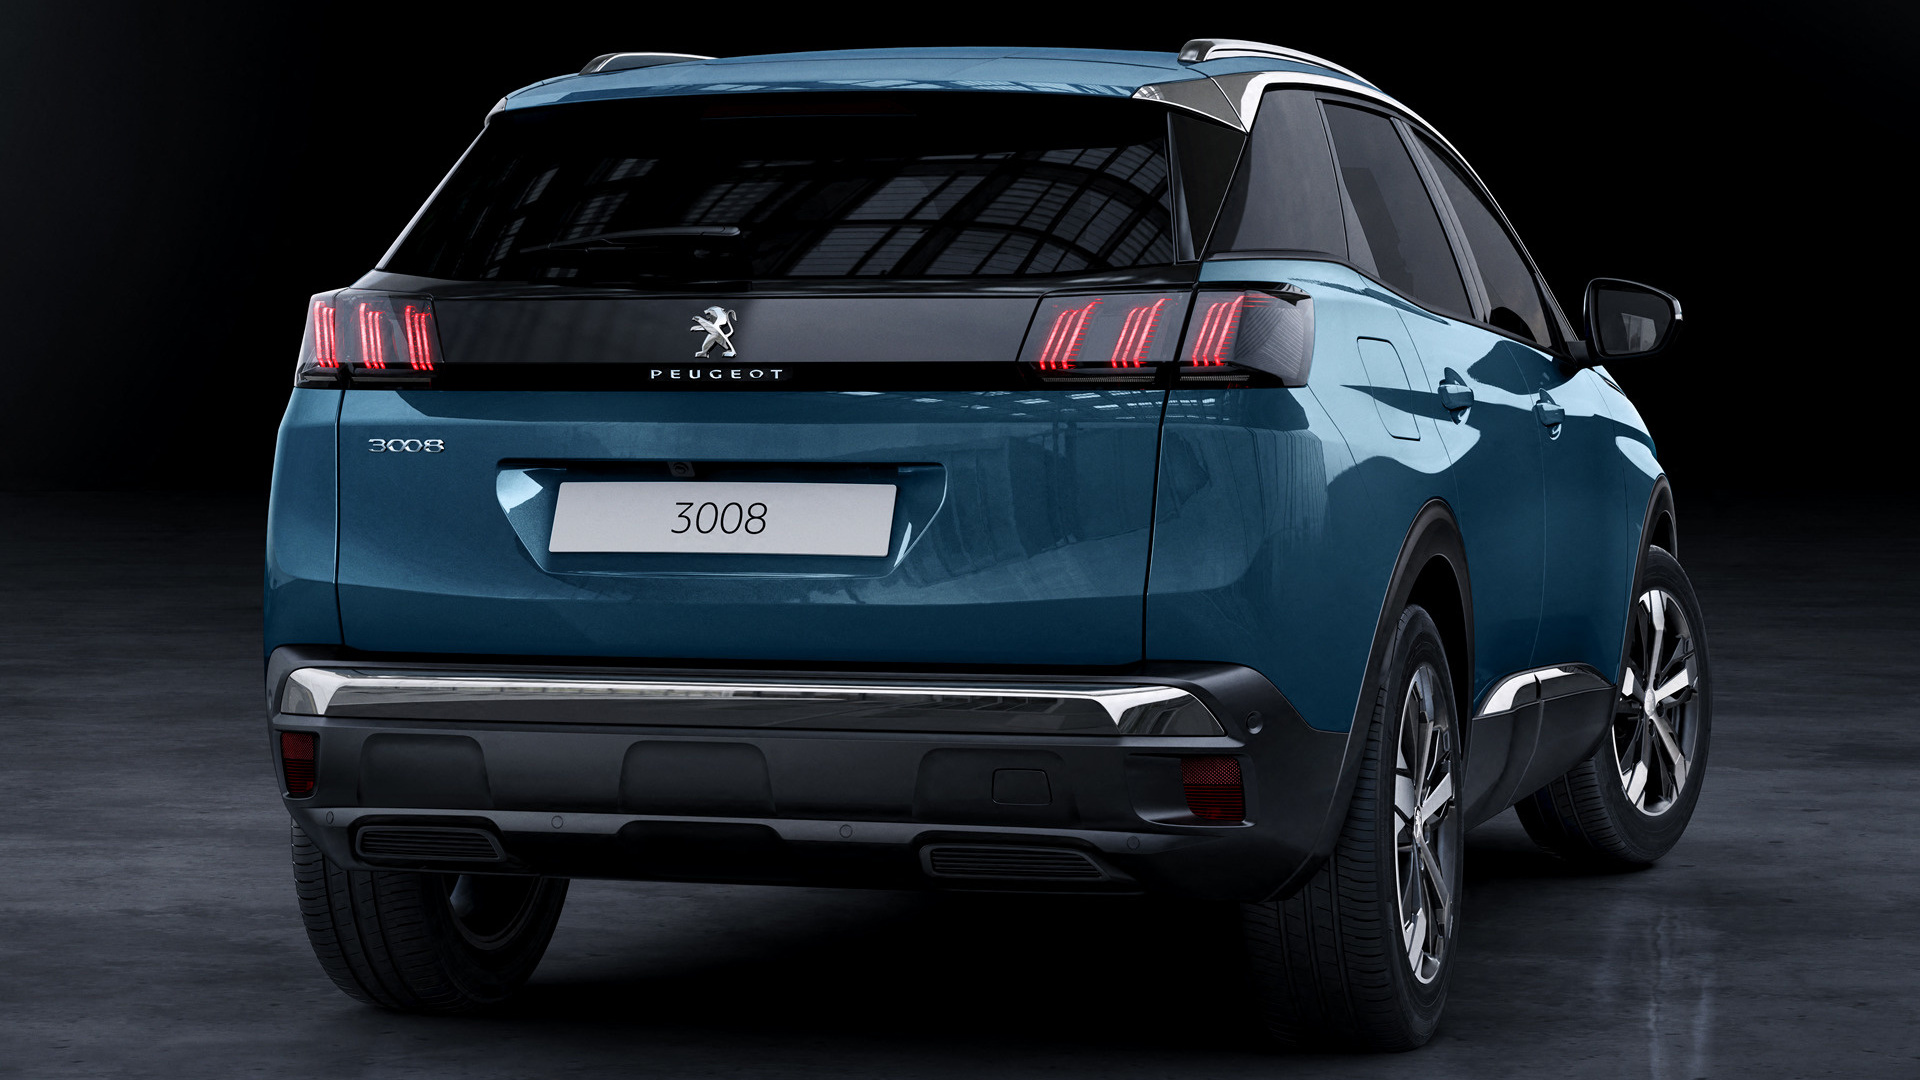 2020 Peugeot 3008 Wallpapers And Hd Images Car Pixel